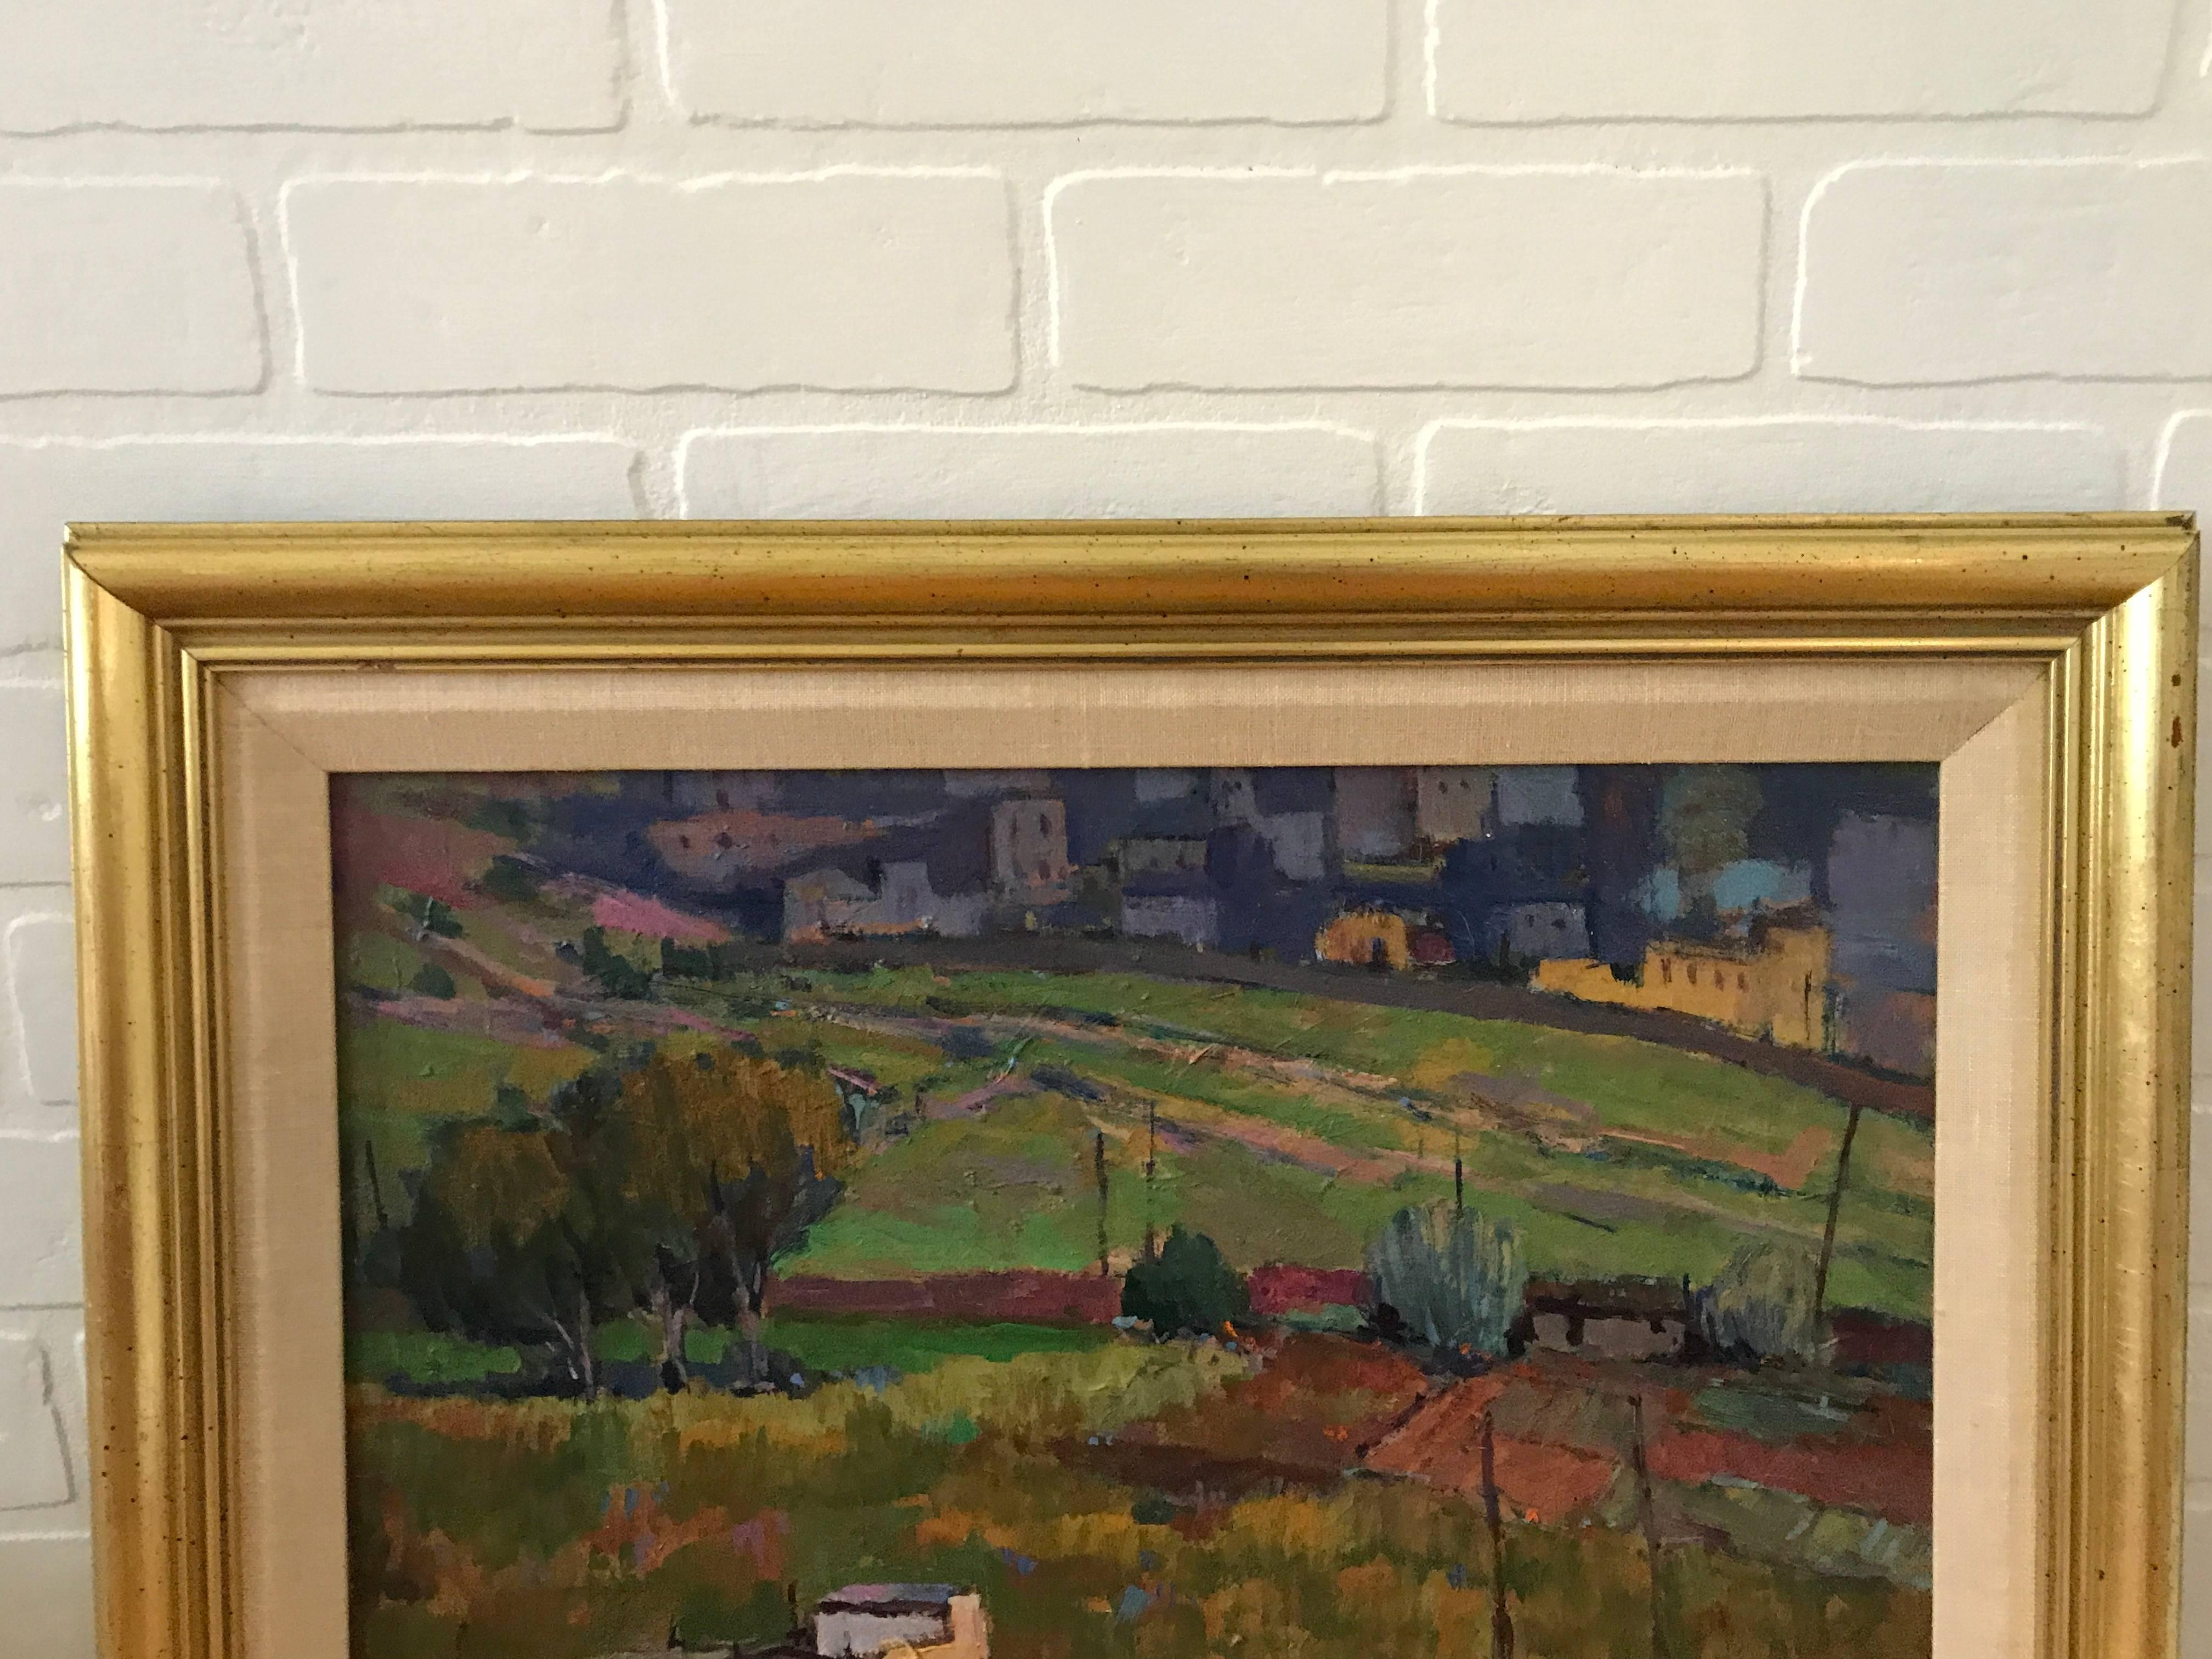 Offered is a fabulous, large 1980s Tuscan landscape oil painting. Framed and matted. Signed, bottom right.